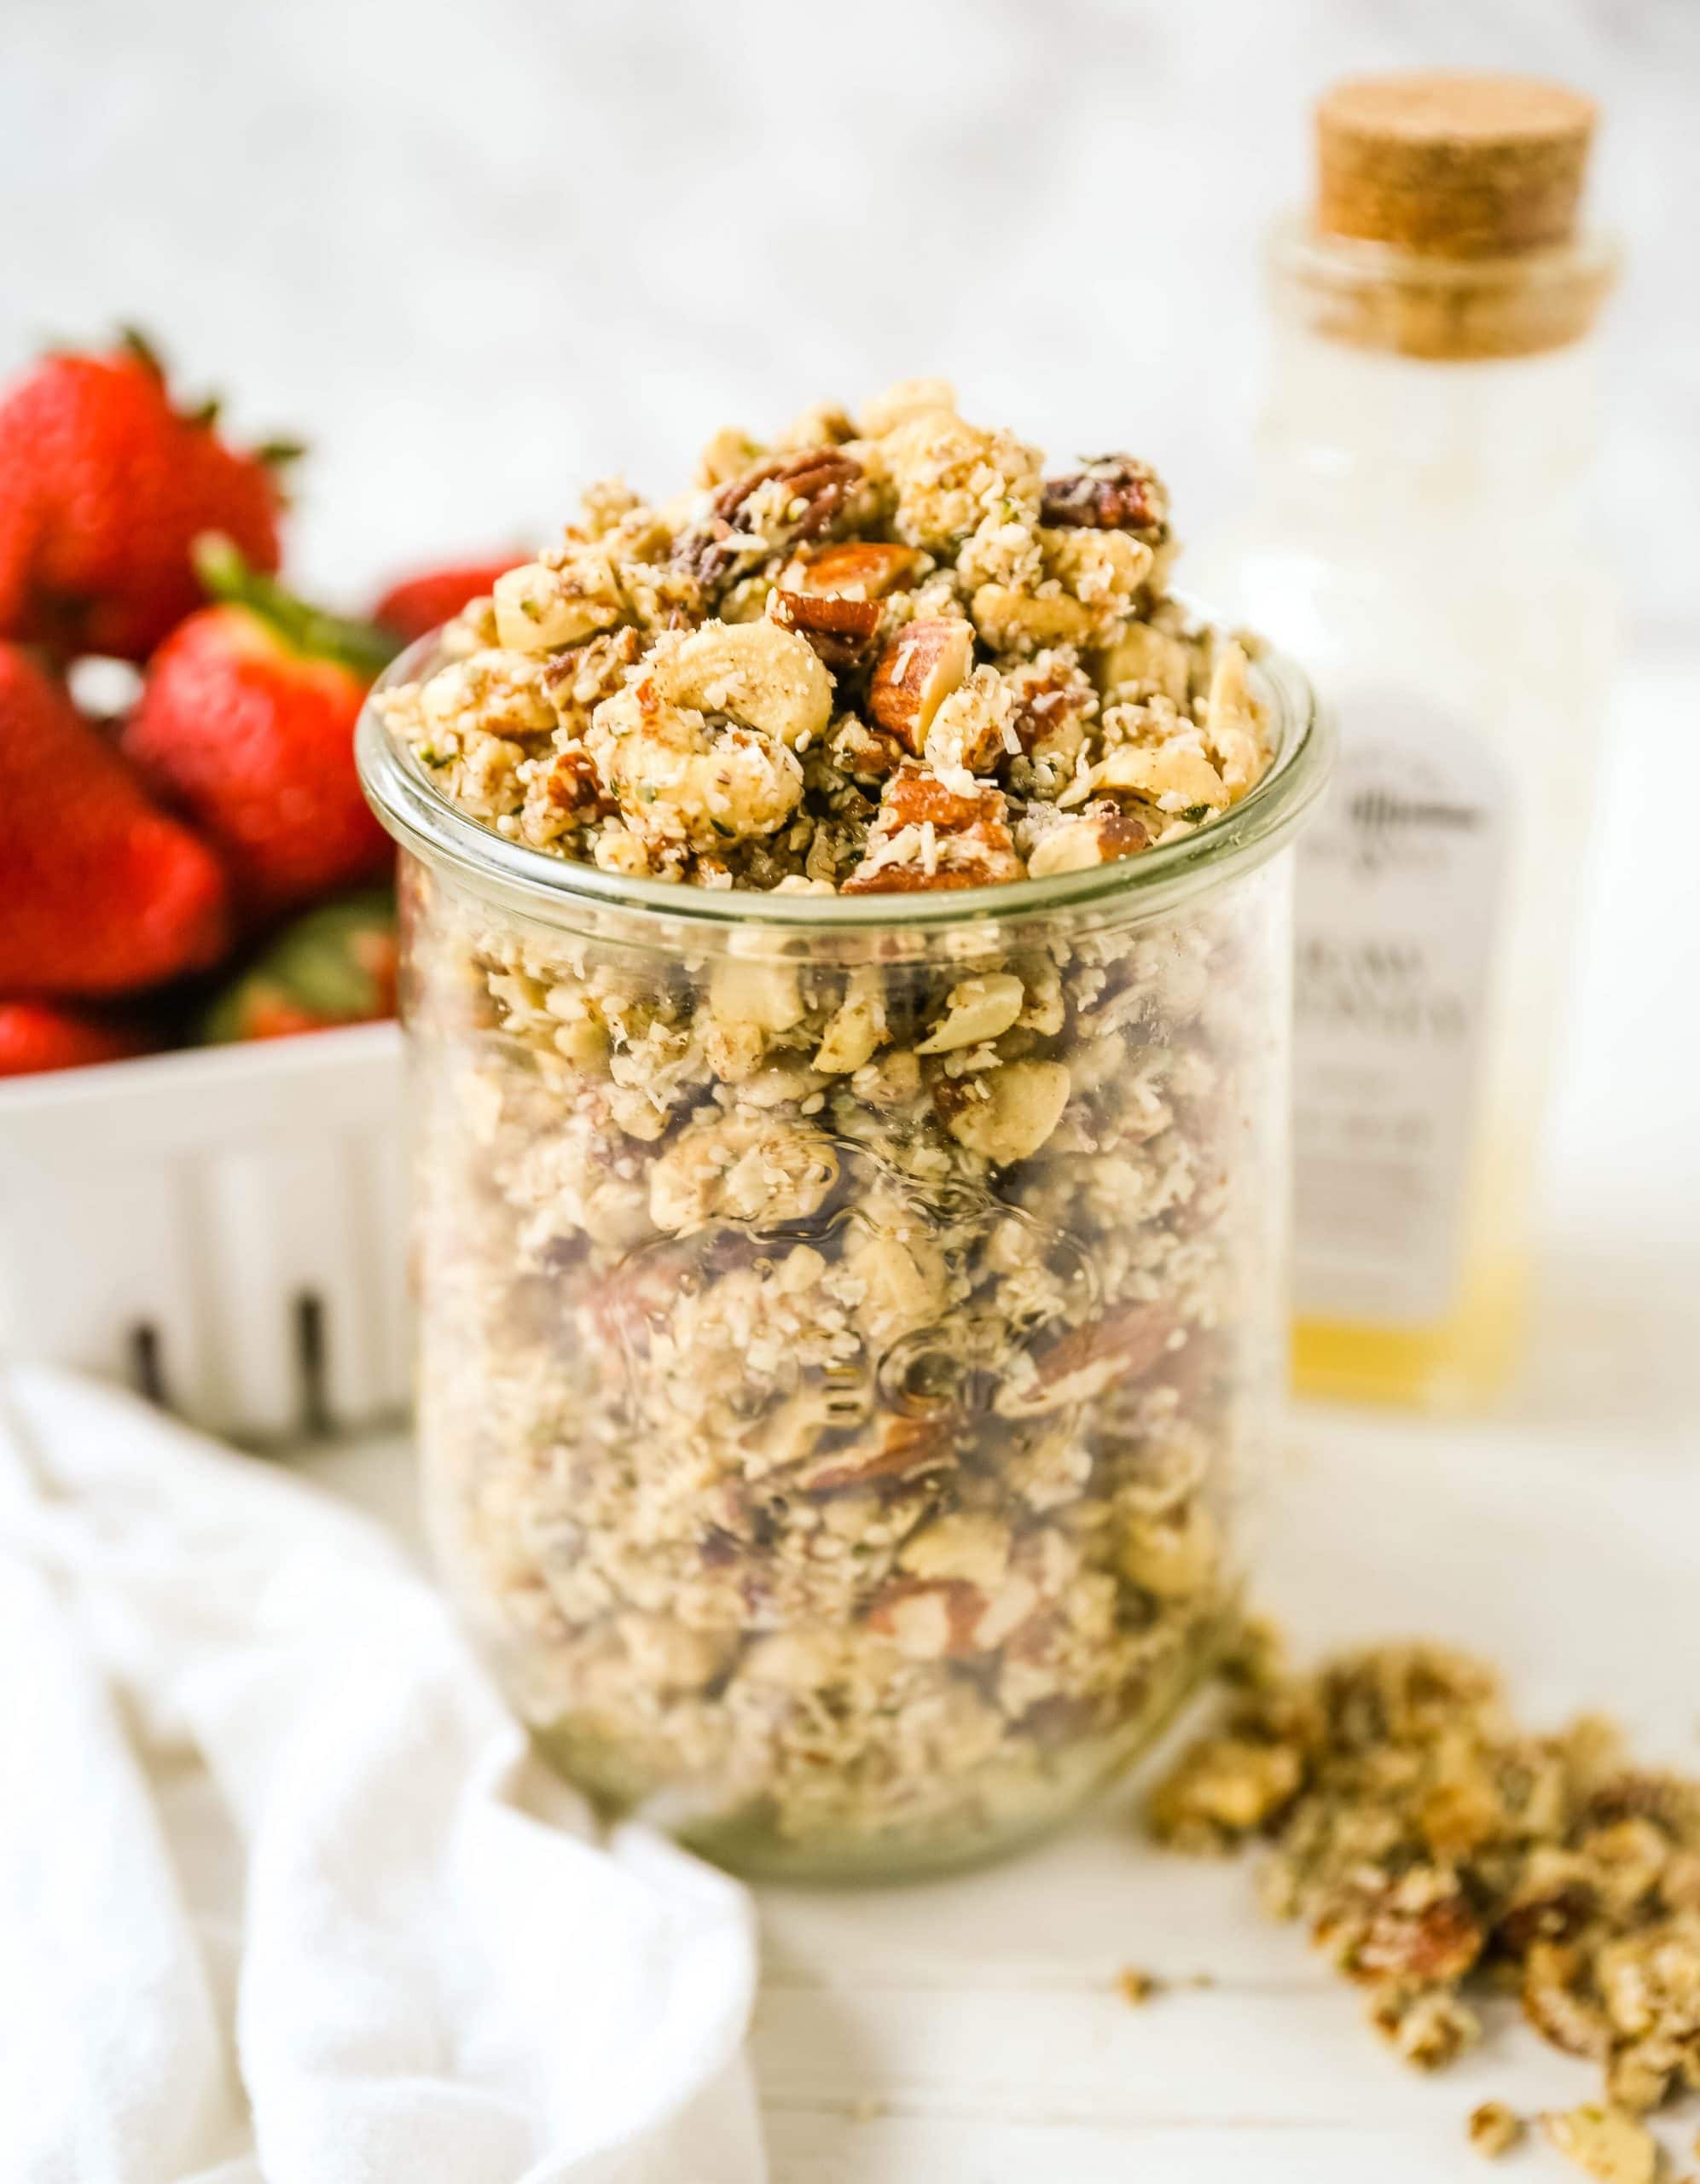 Nutty Coconut Granola Almonds, cashews, walnuts, pecans, coconut, hemp seeds, unsweetened coconut flakes, coconut oil, and honey make this an all-natural snack. www.modernhoney.com #granola #nuttygranola #snack #healthy